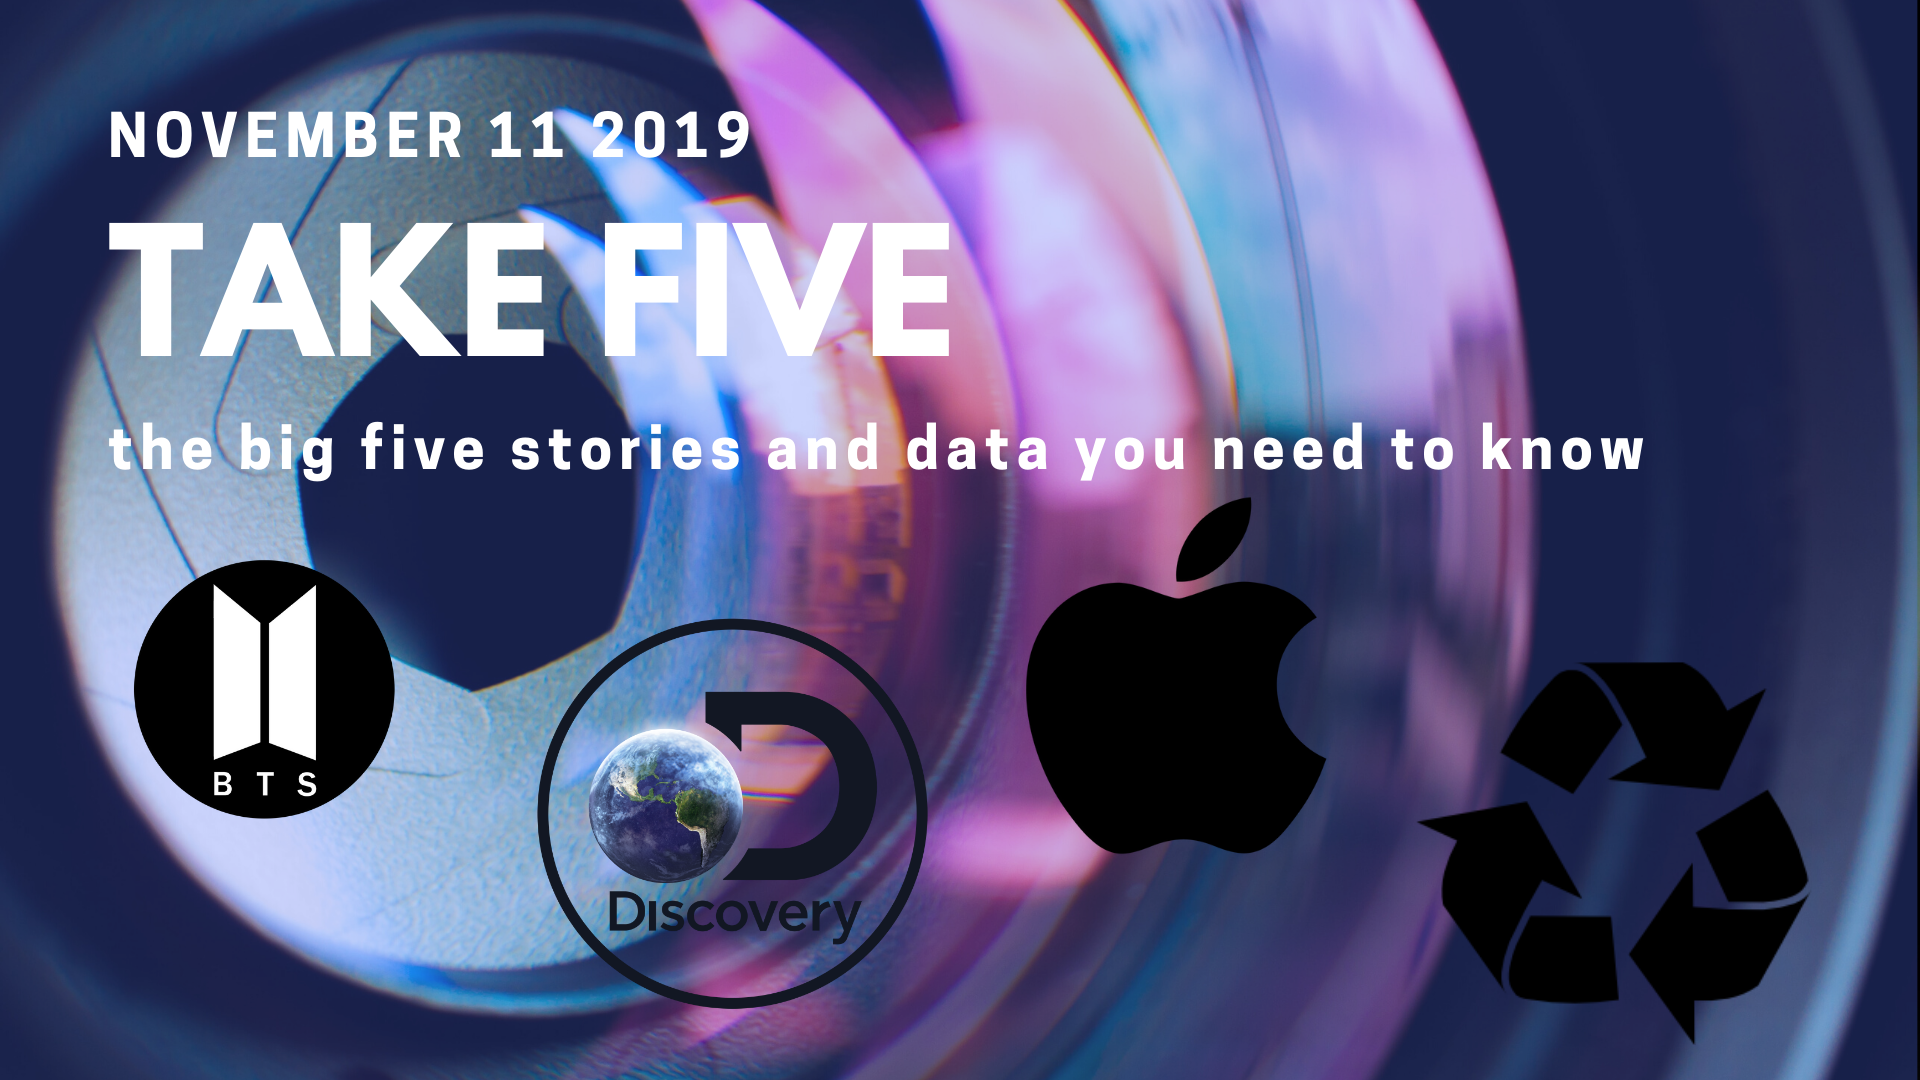 Cover image for Take Five (the big five stories and data you need to know) November 11th 2019